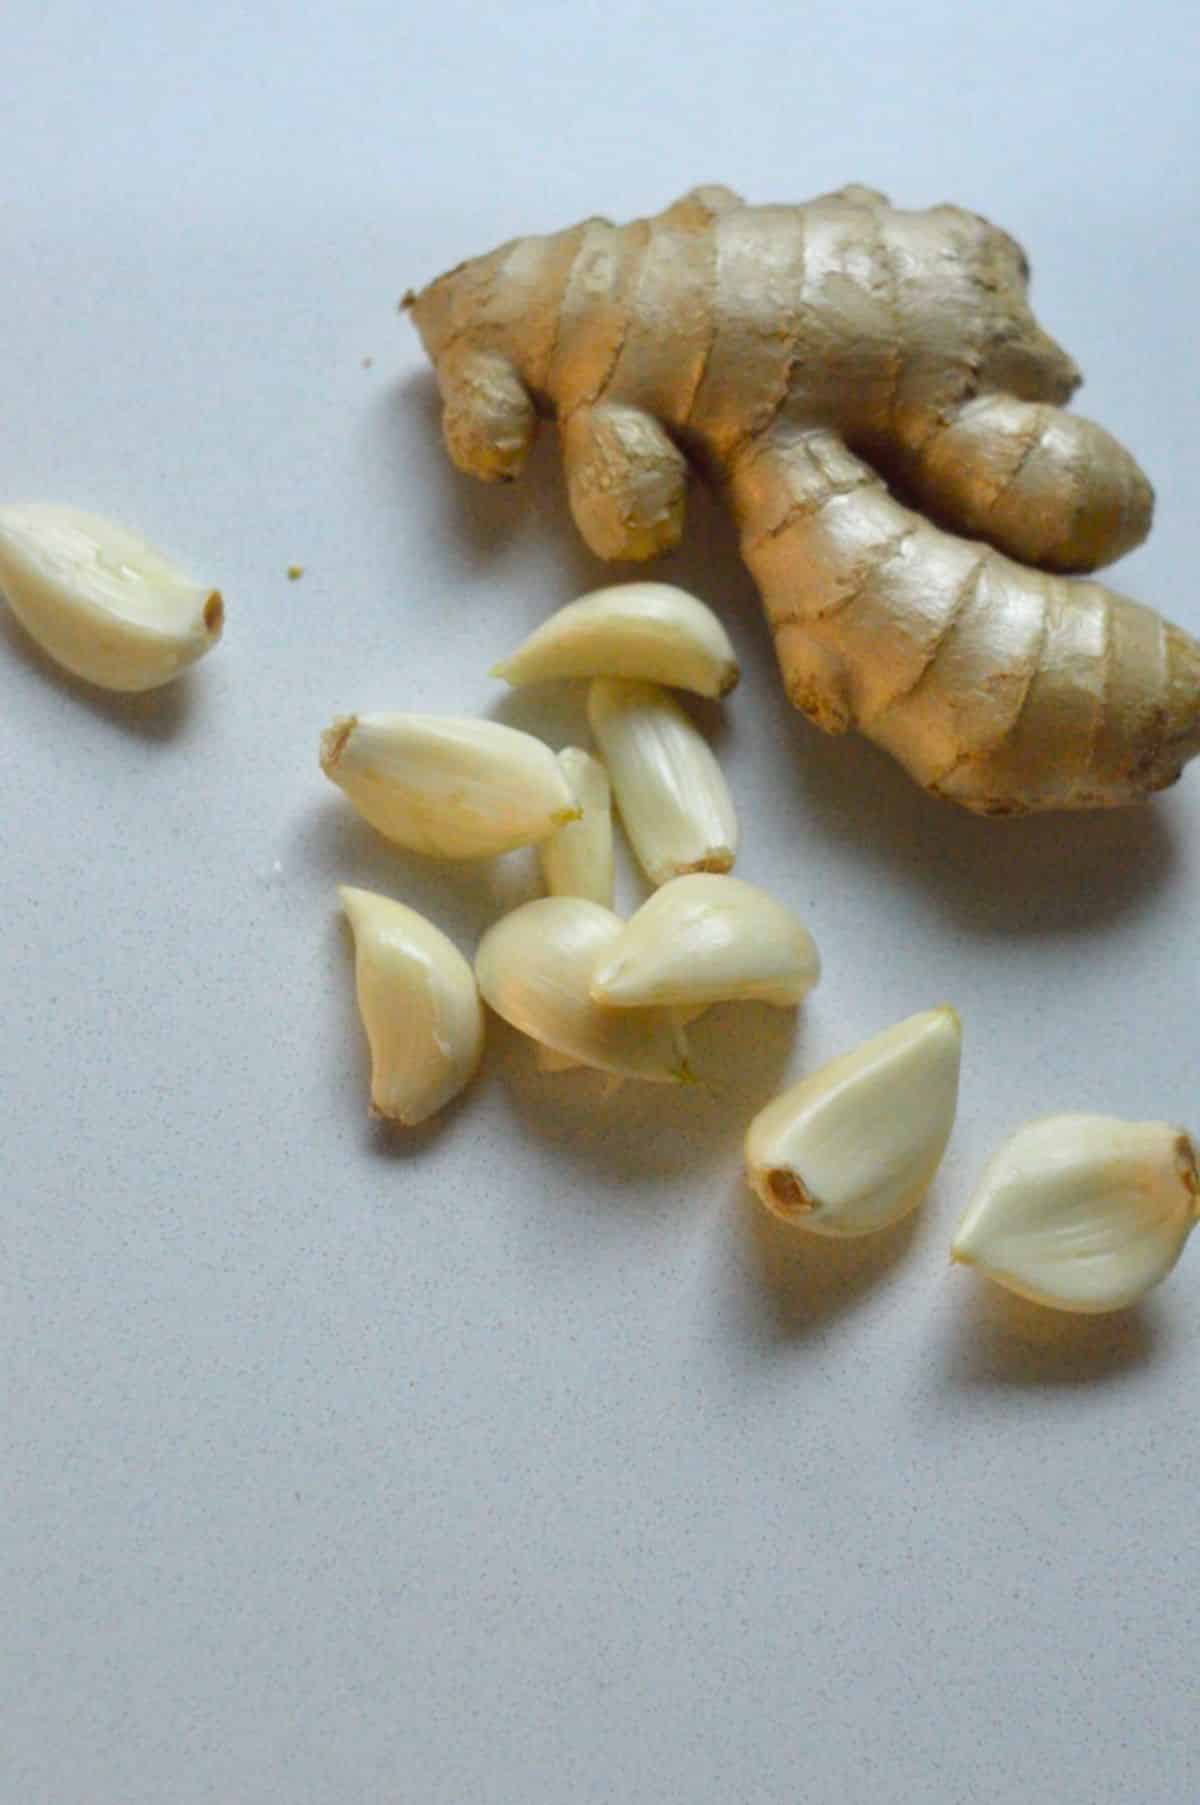 Ginger root and peeled garlic cloves.